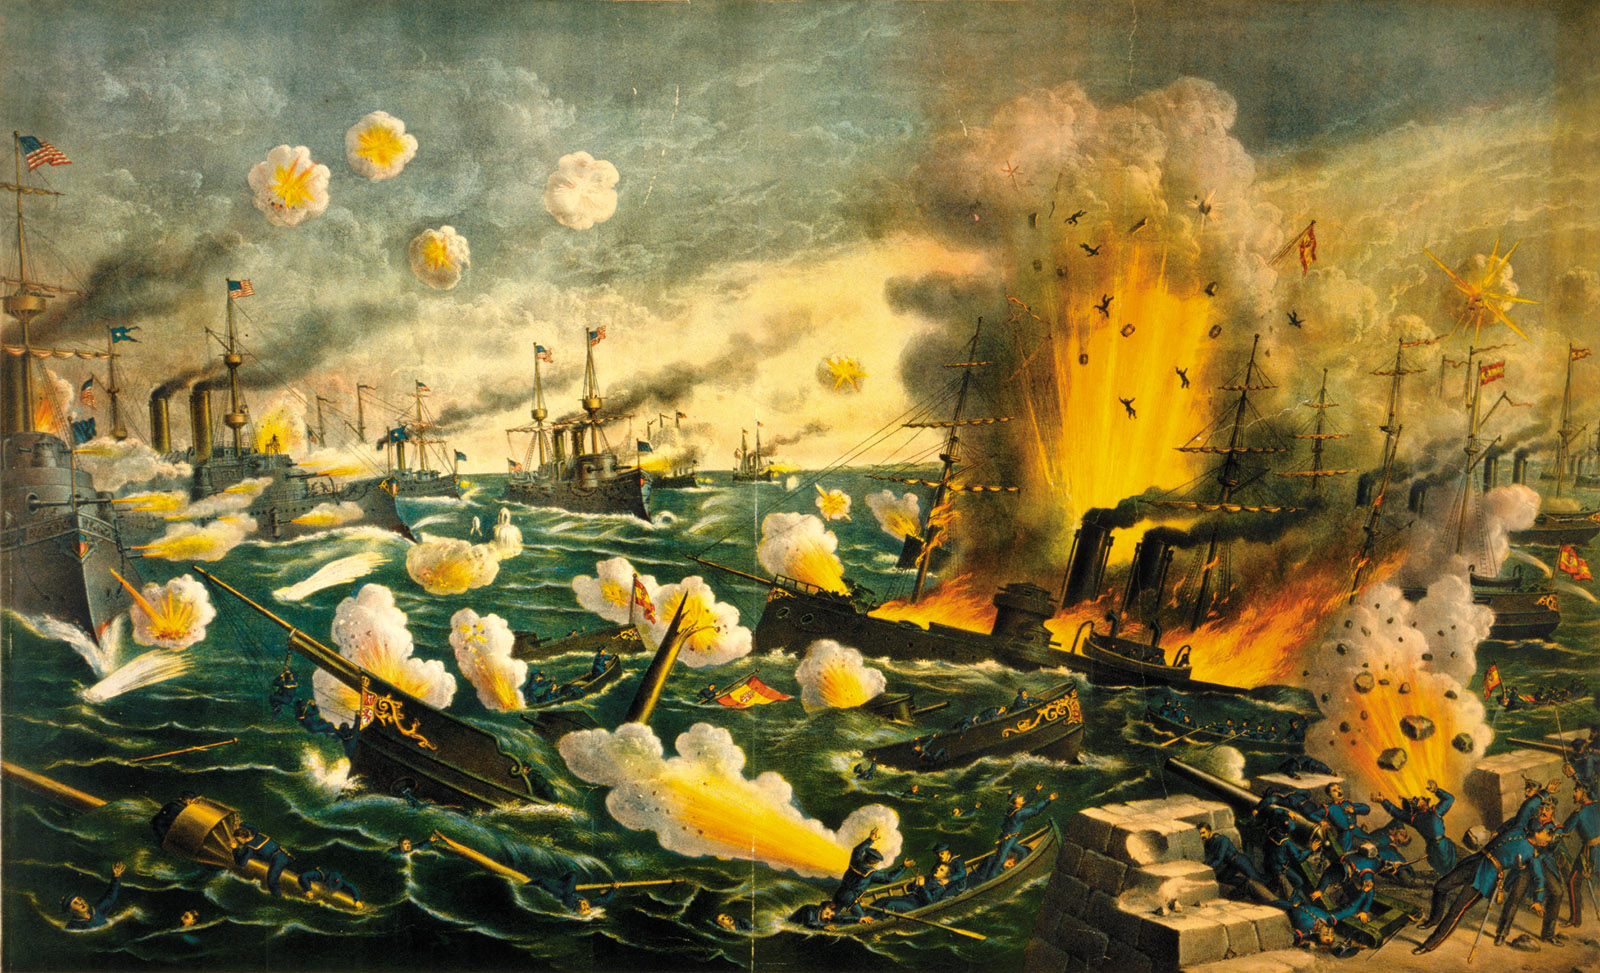 ‘The Great Naval Battle Off Cavite (Manila Bay),’ in which the US squadron led by Commodore George Dewey defeated the Spanish fleet in the first major engagement of the Spanish-American War, May 1, 1898